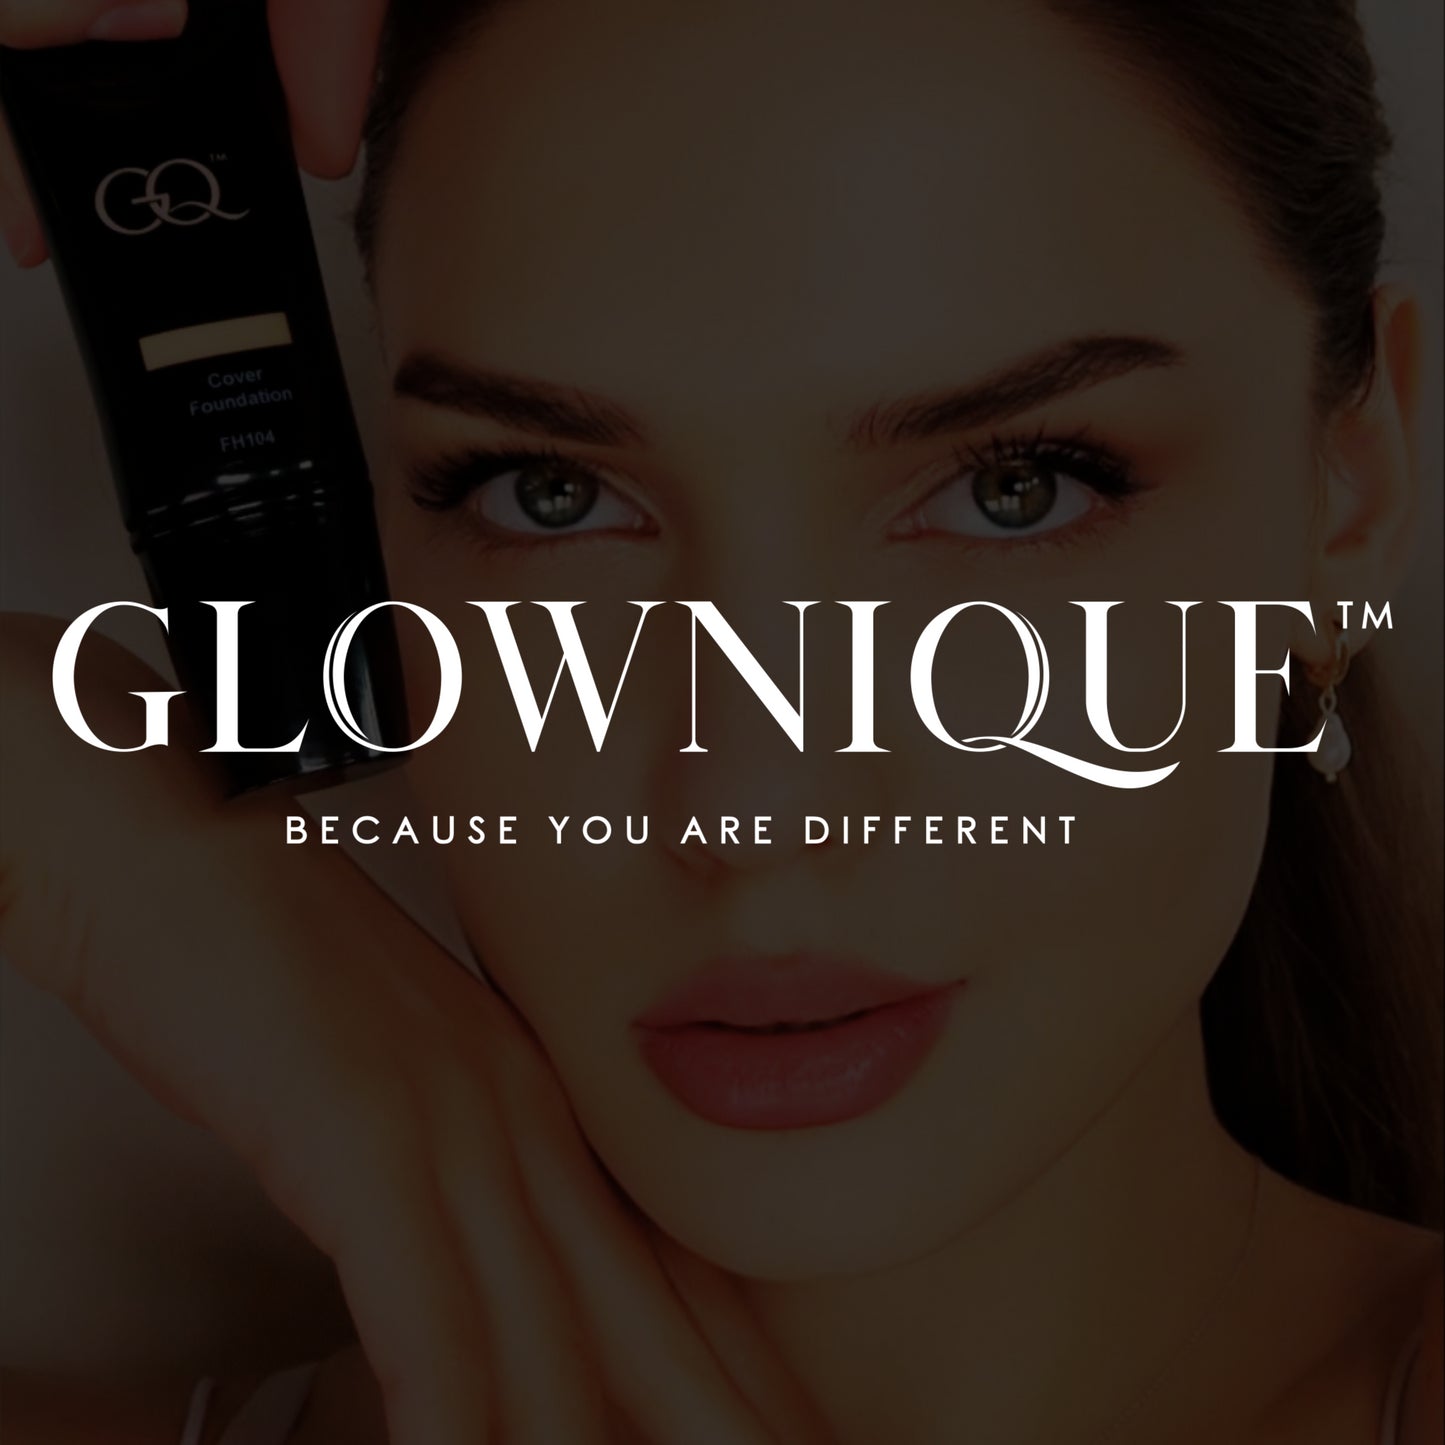 Touch-Up Blotting Papers | GLOWNIQUE